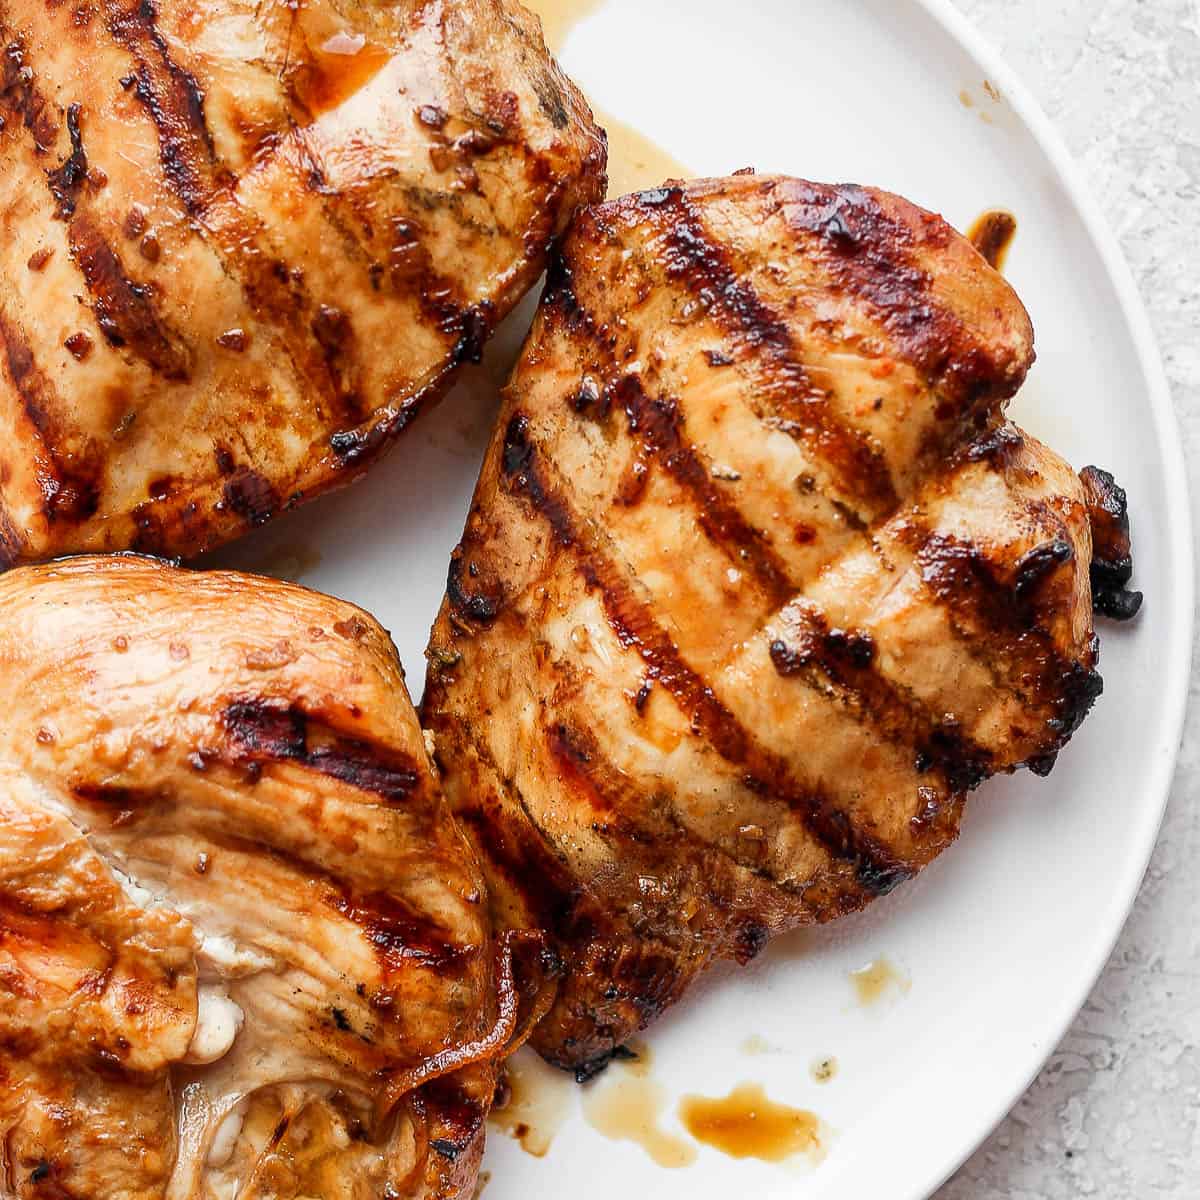 15-nutrition-facts-for-grilled-chicken-breast